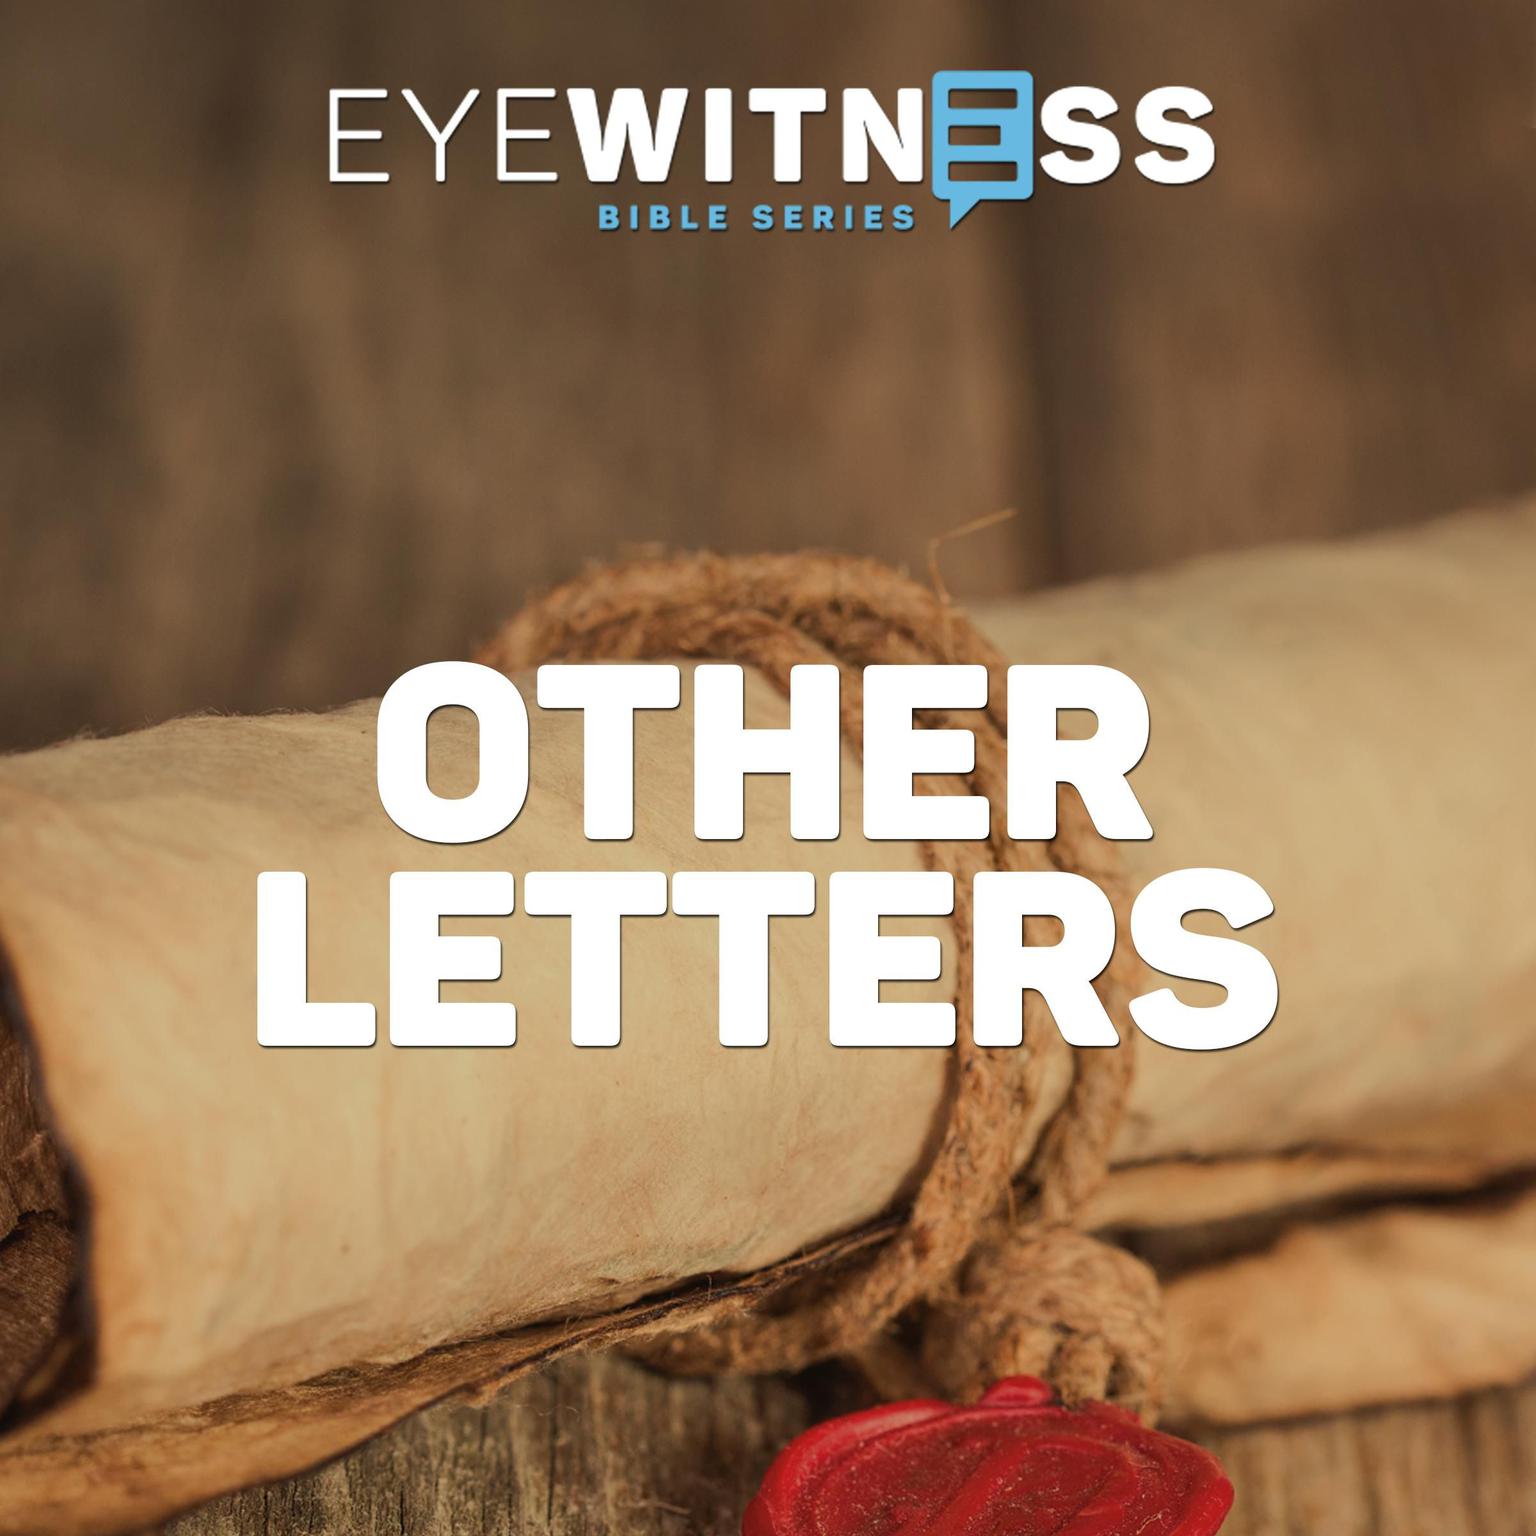 Eyewitness Bible Series: Other Letters Audiobook, by Christian History Institute